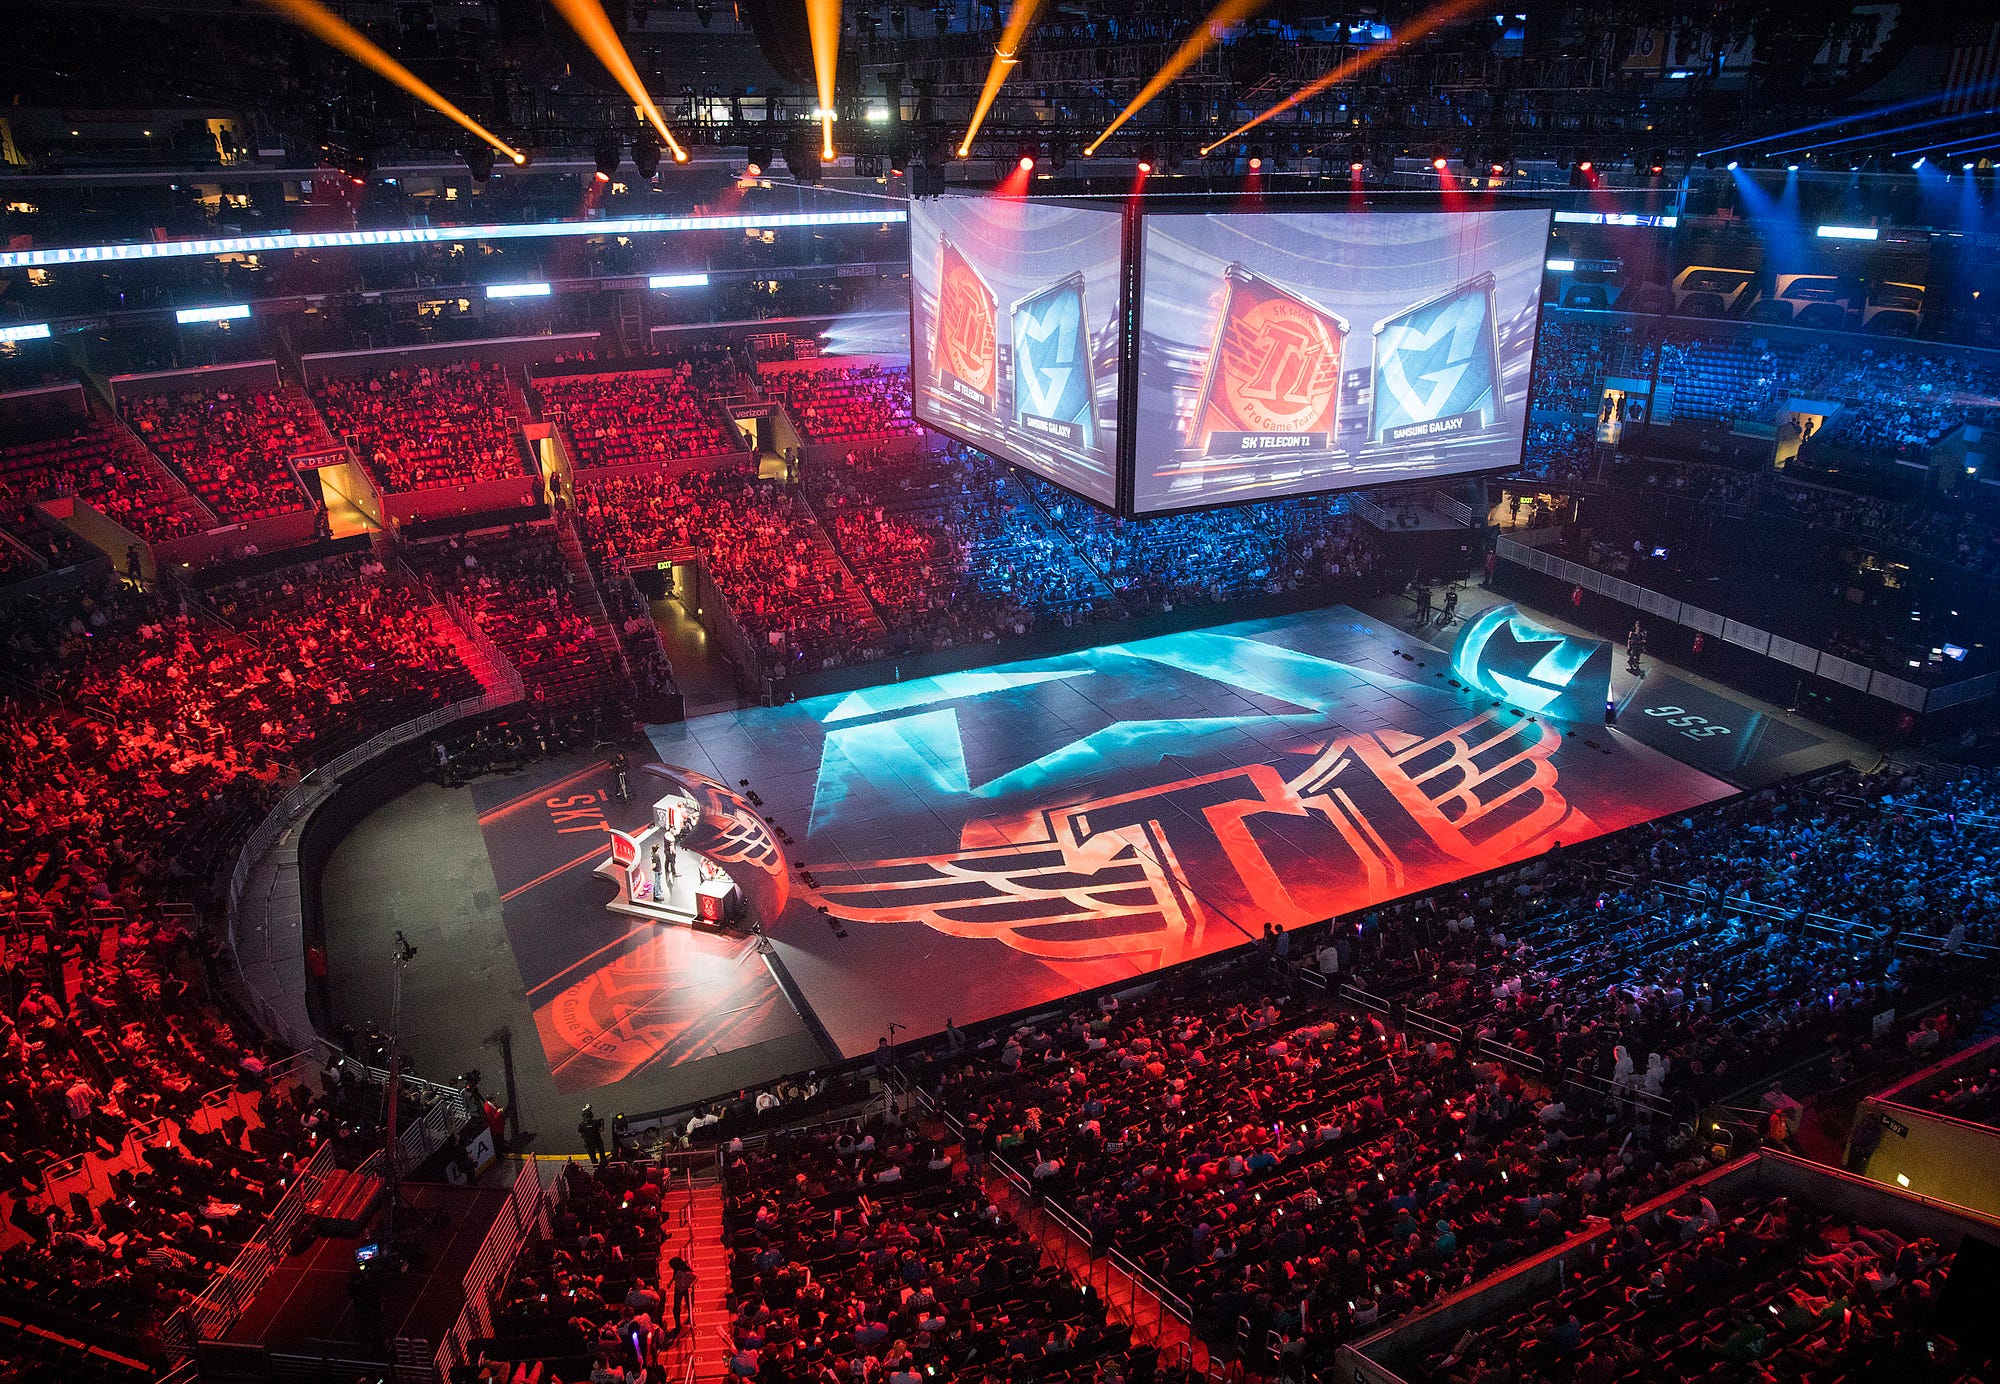 This year’s League of Legends World Championships finals drew 43